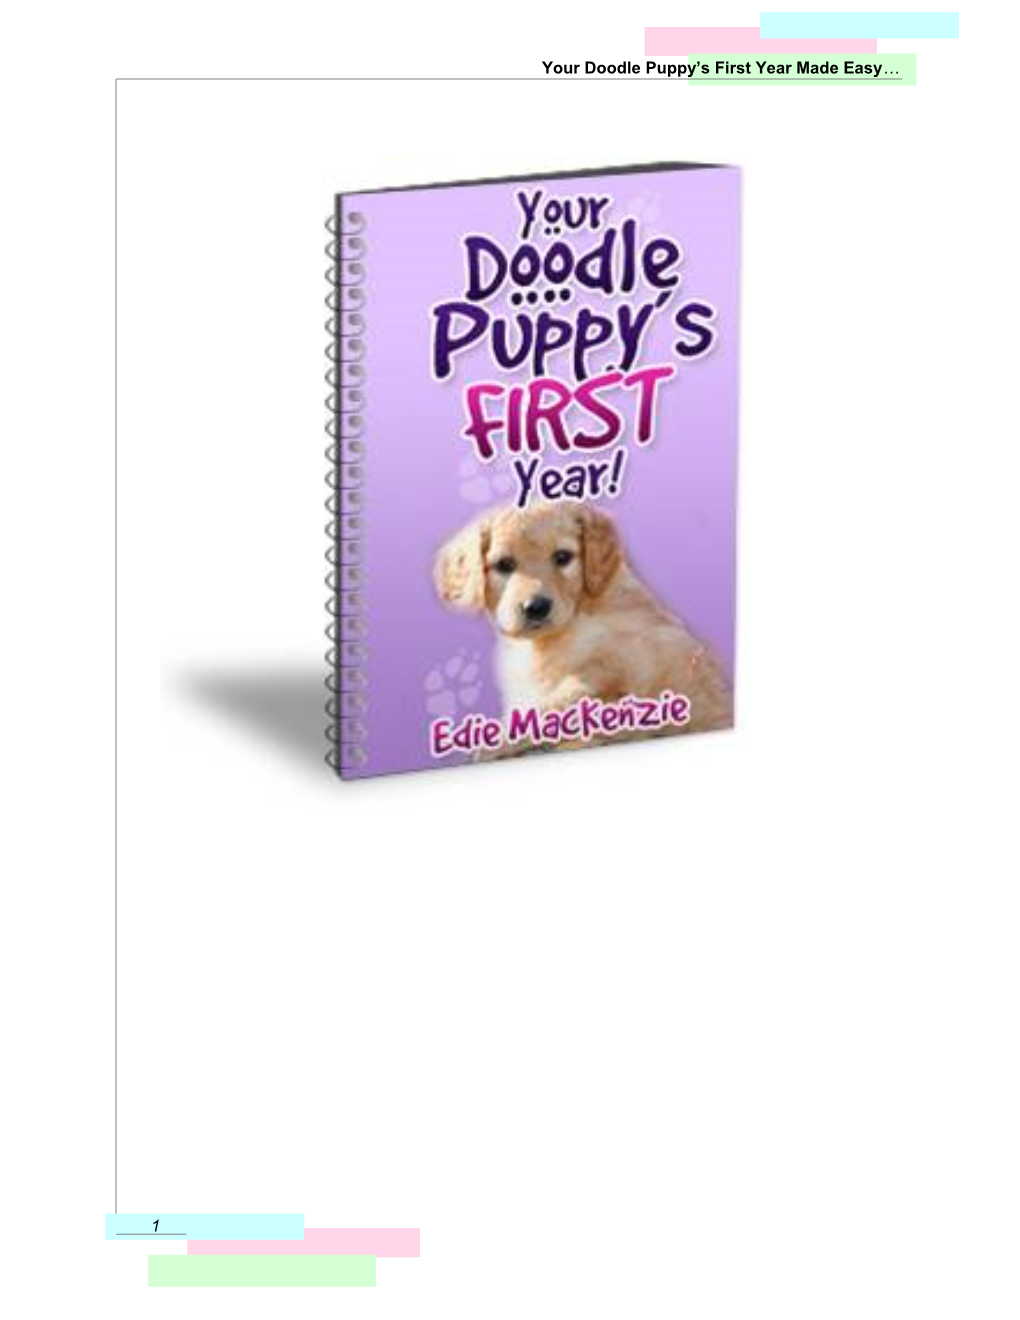 Your Doodle Puppy's First Year Made Easy